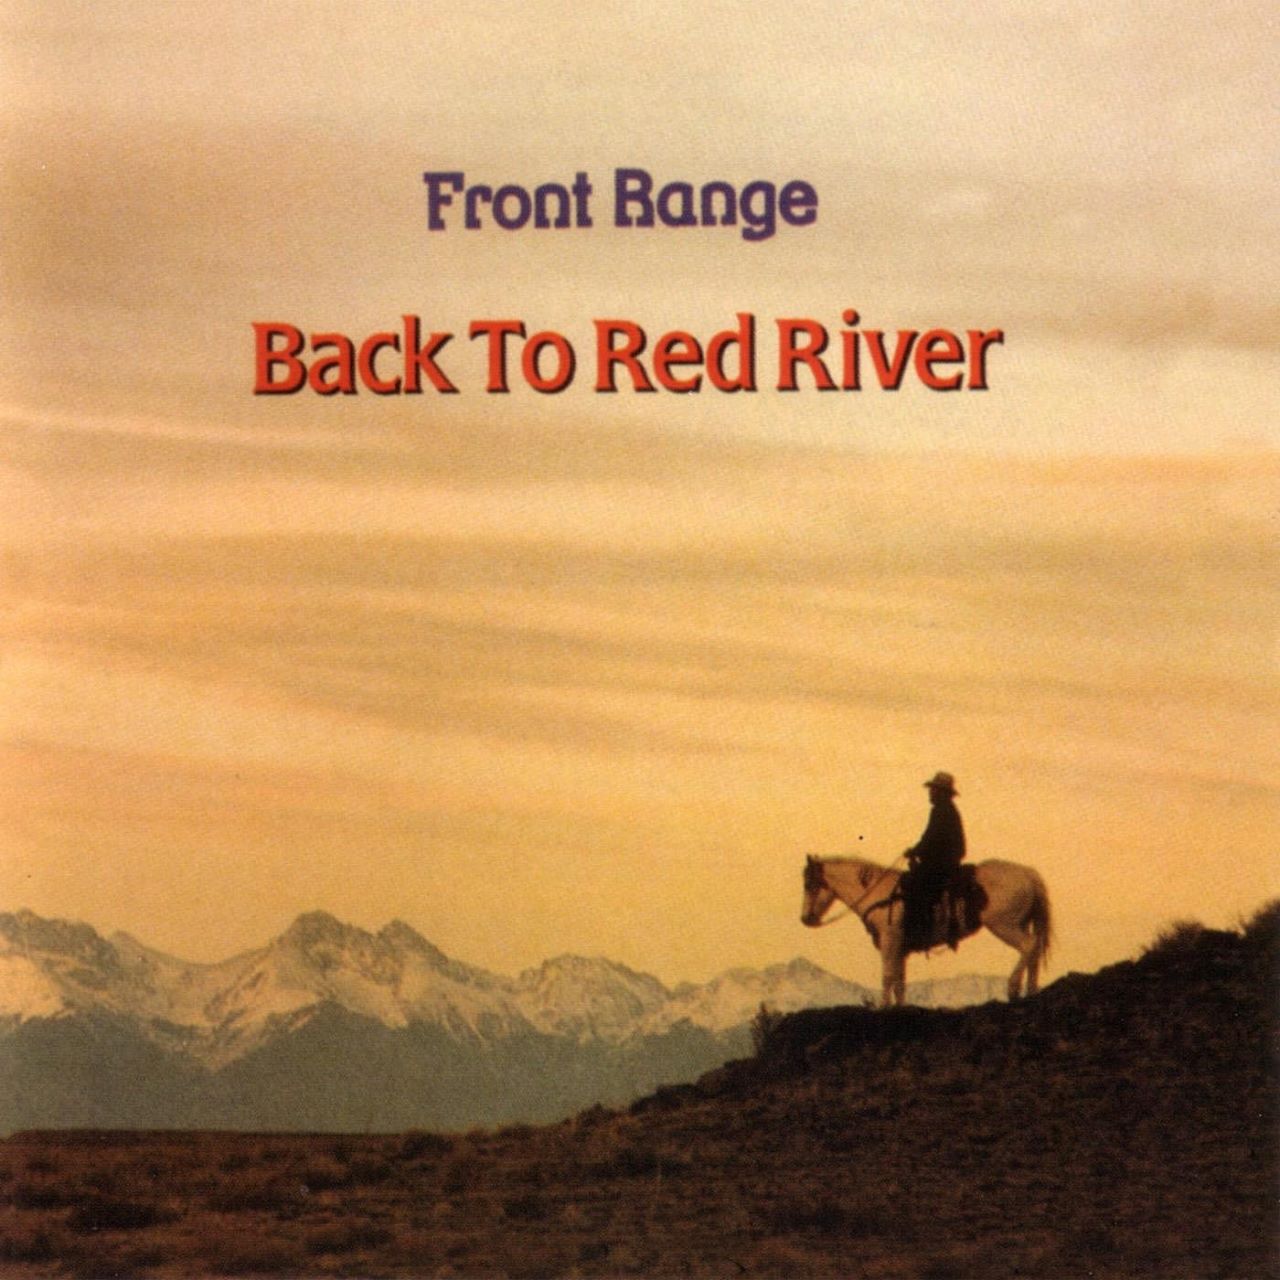 Front Range - Back To Red River cover album